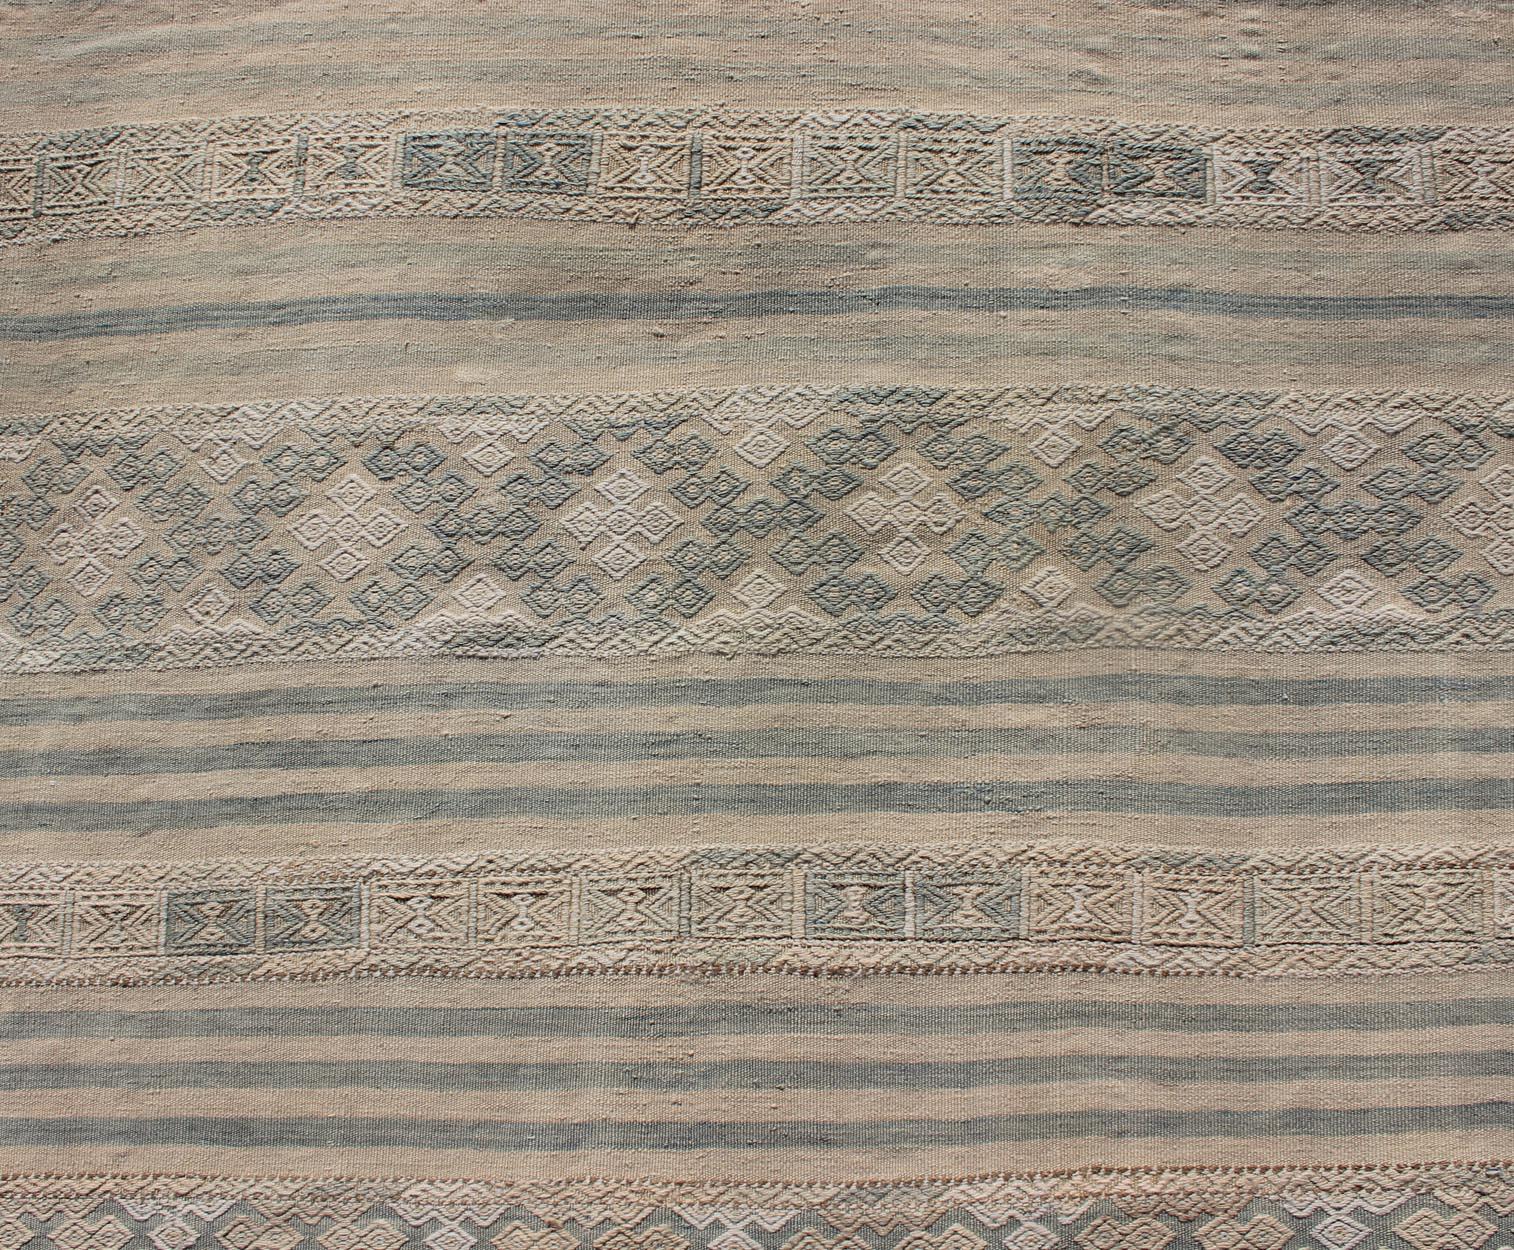 Flat-Weave Kilim with Embroideries in Taupe, Tan, Blue and Gray For Sale 2